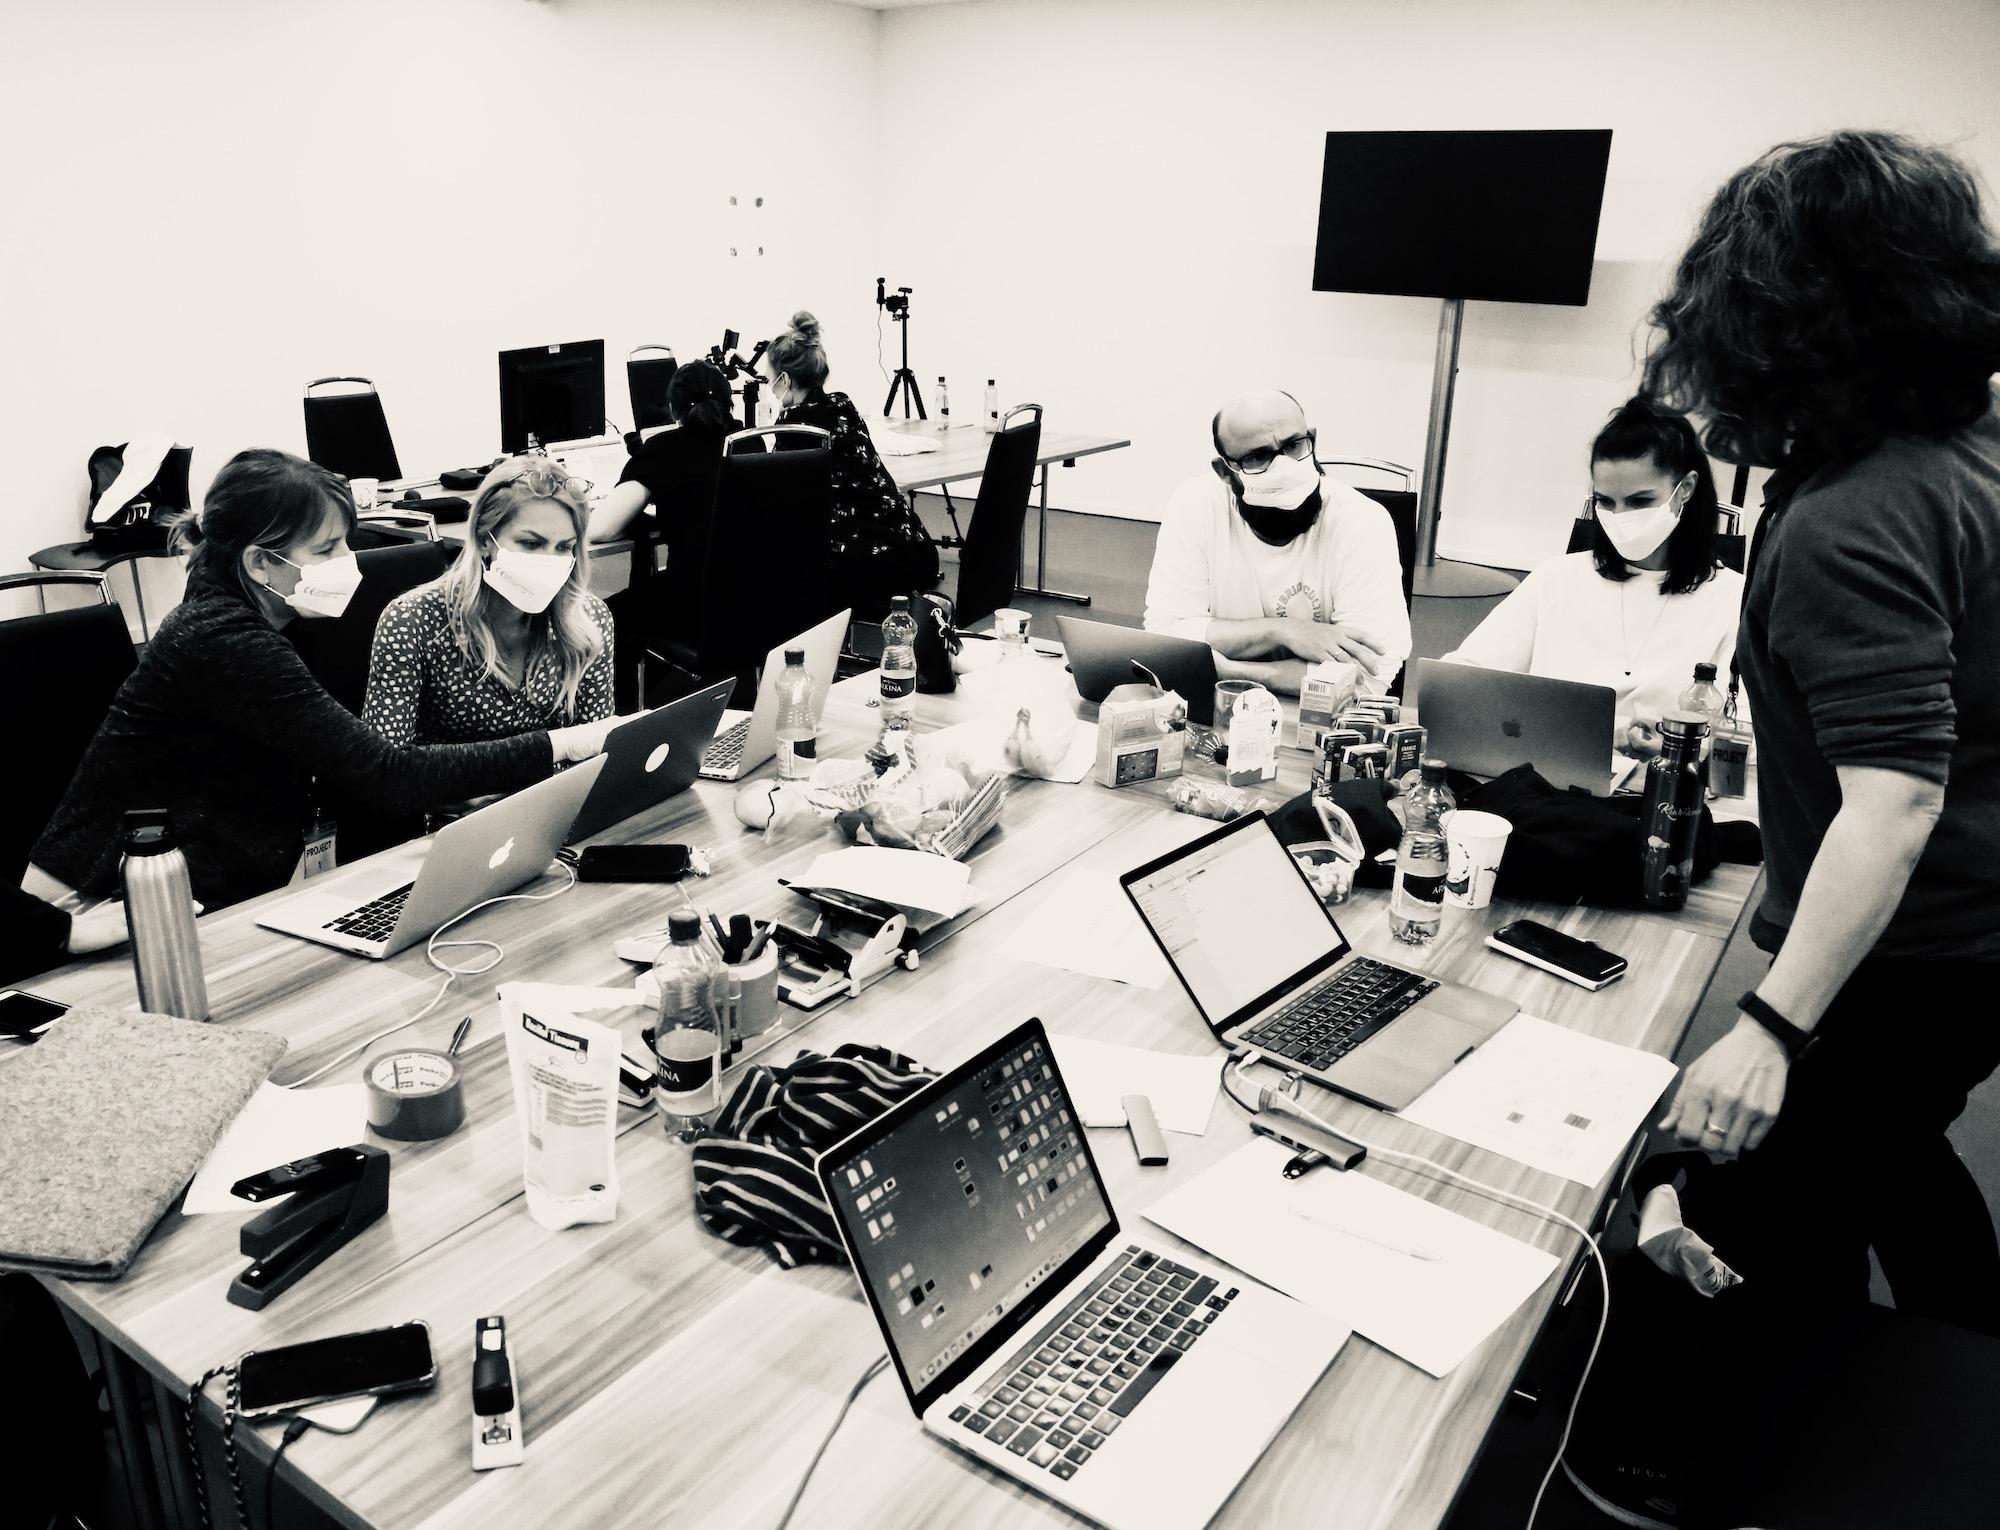 A black and white photo of 6 people wearing masks on laptops at a wooden table.